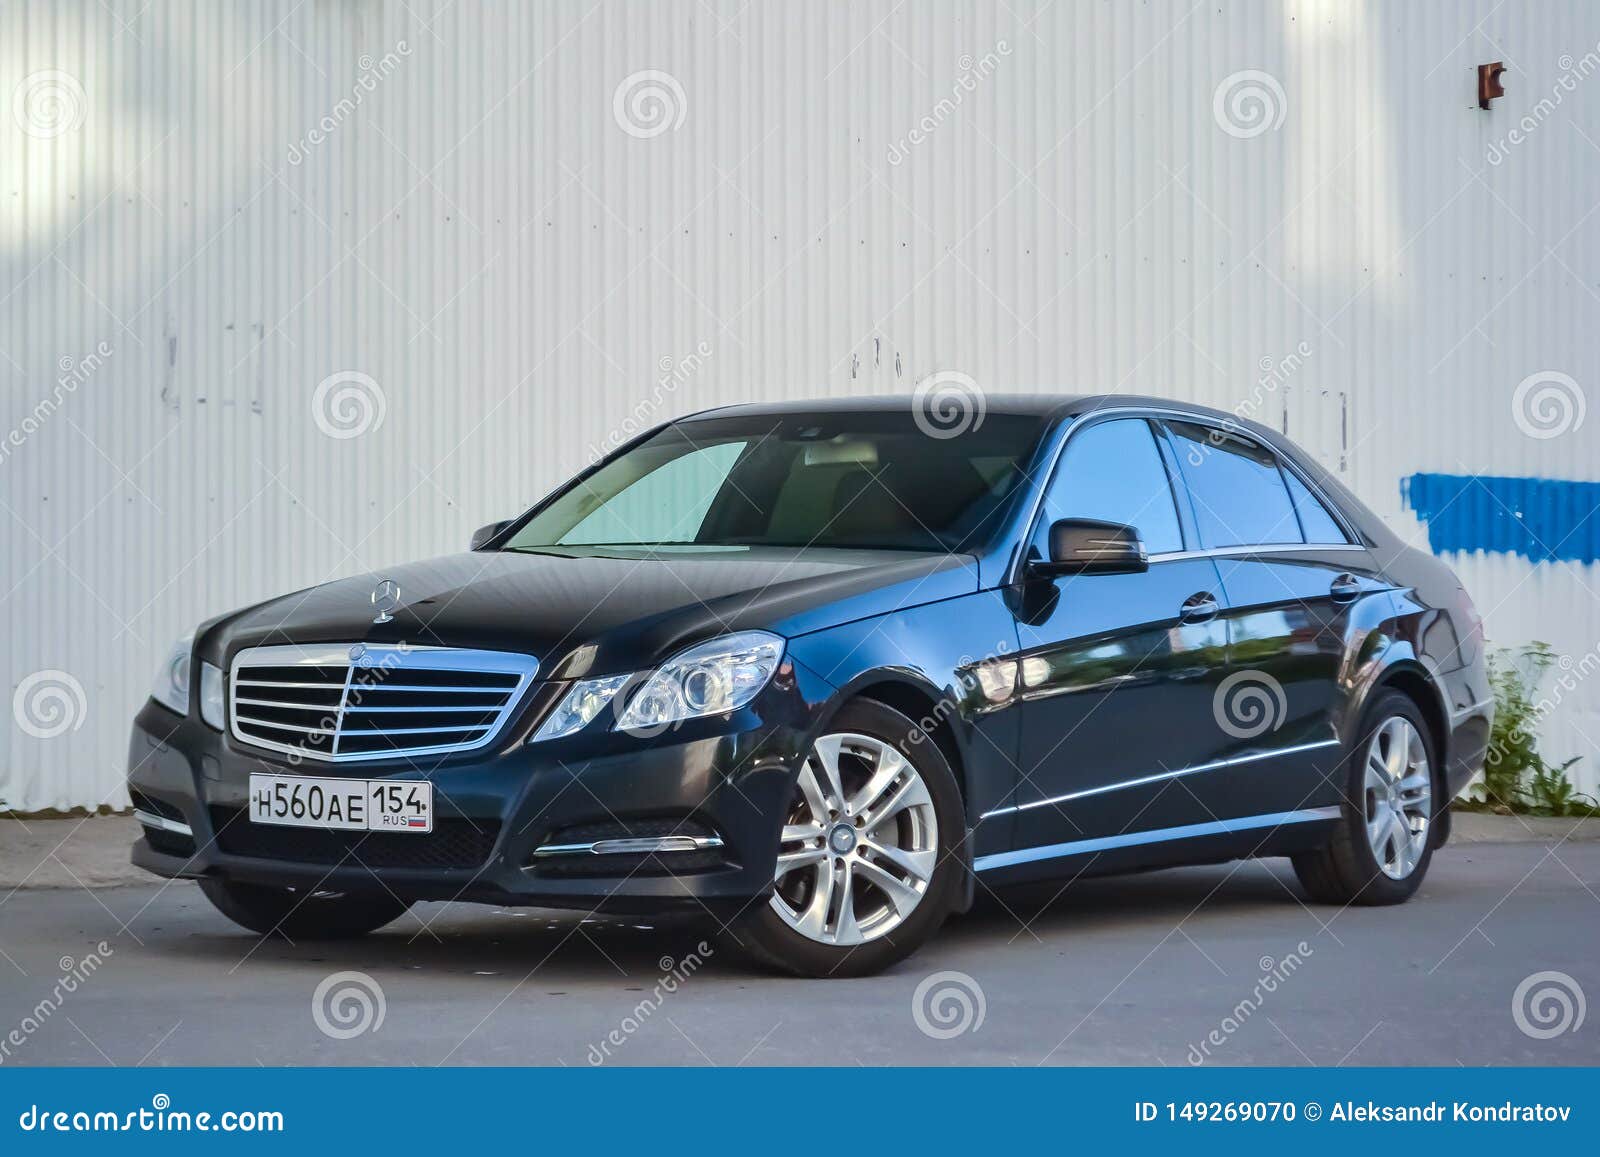 Black Mercedes Benz E Class E350 2010 Year Front View With